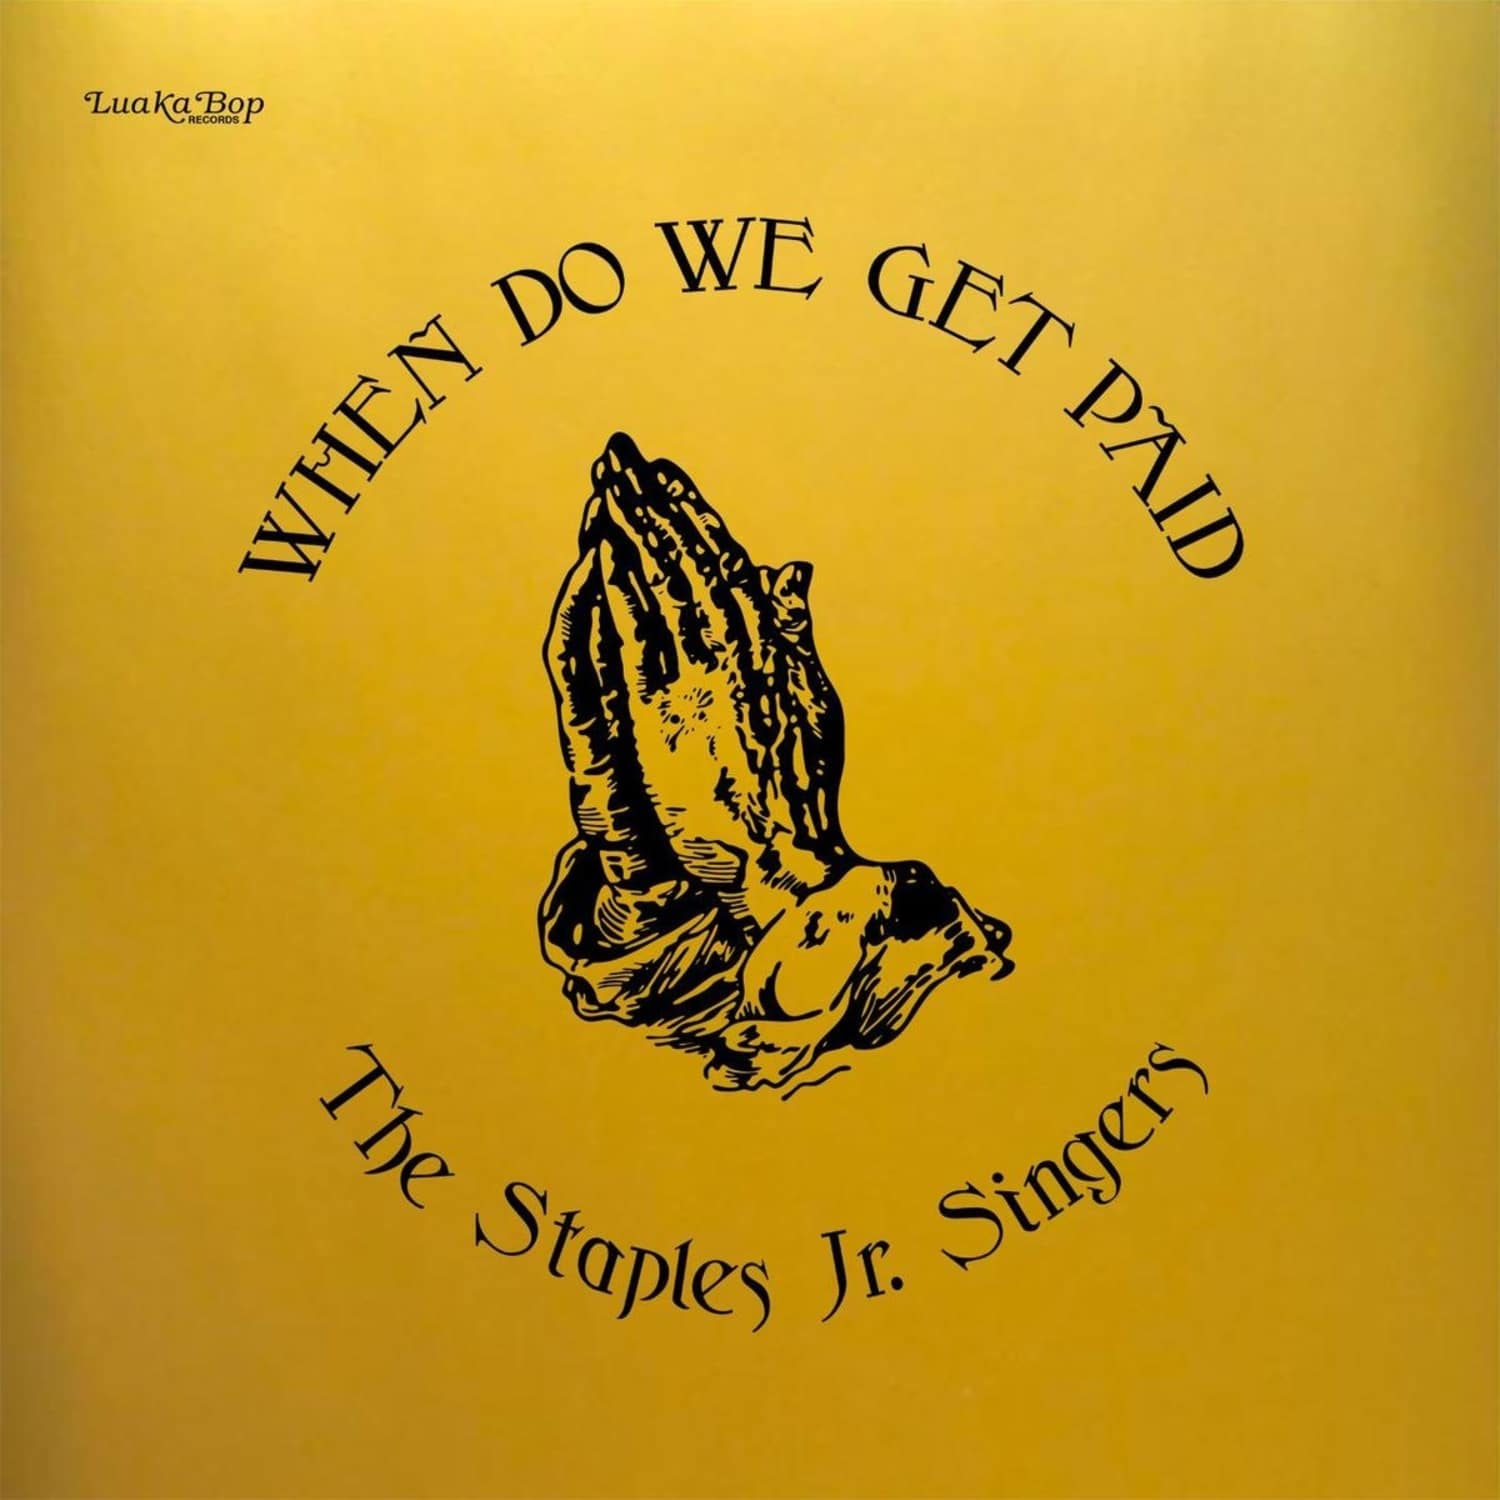 The Staples Jr. Singer - WHEN DO WE GET PAID 